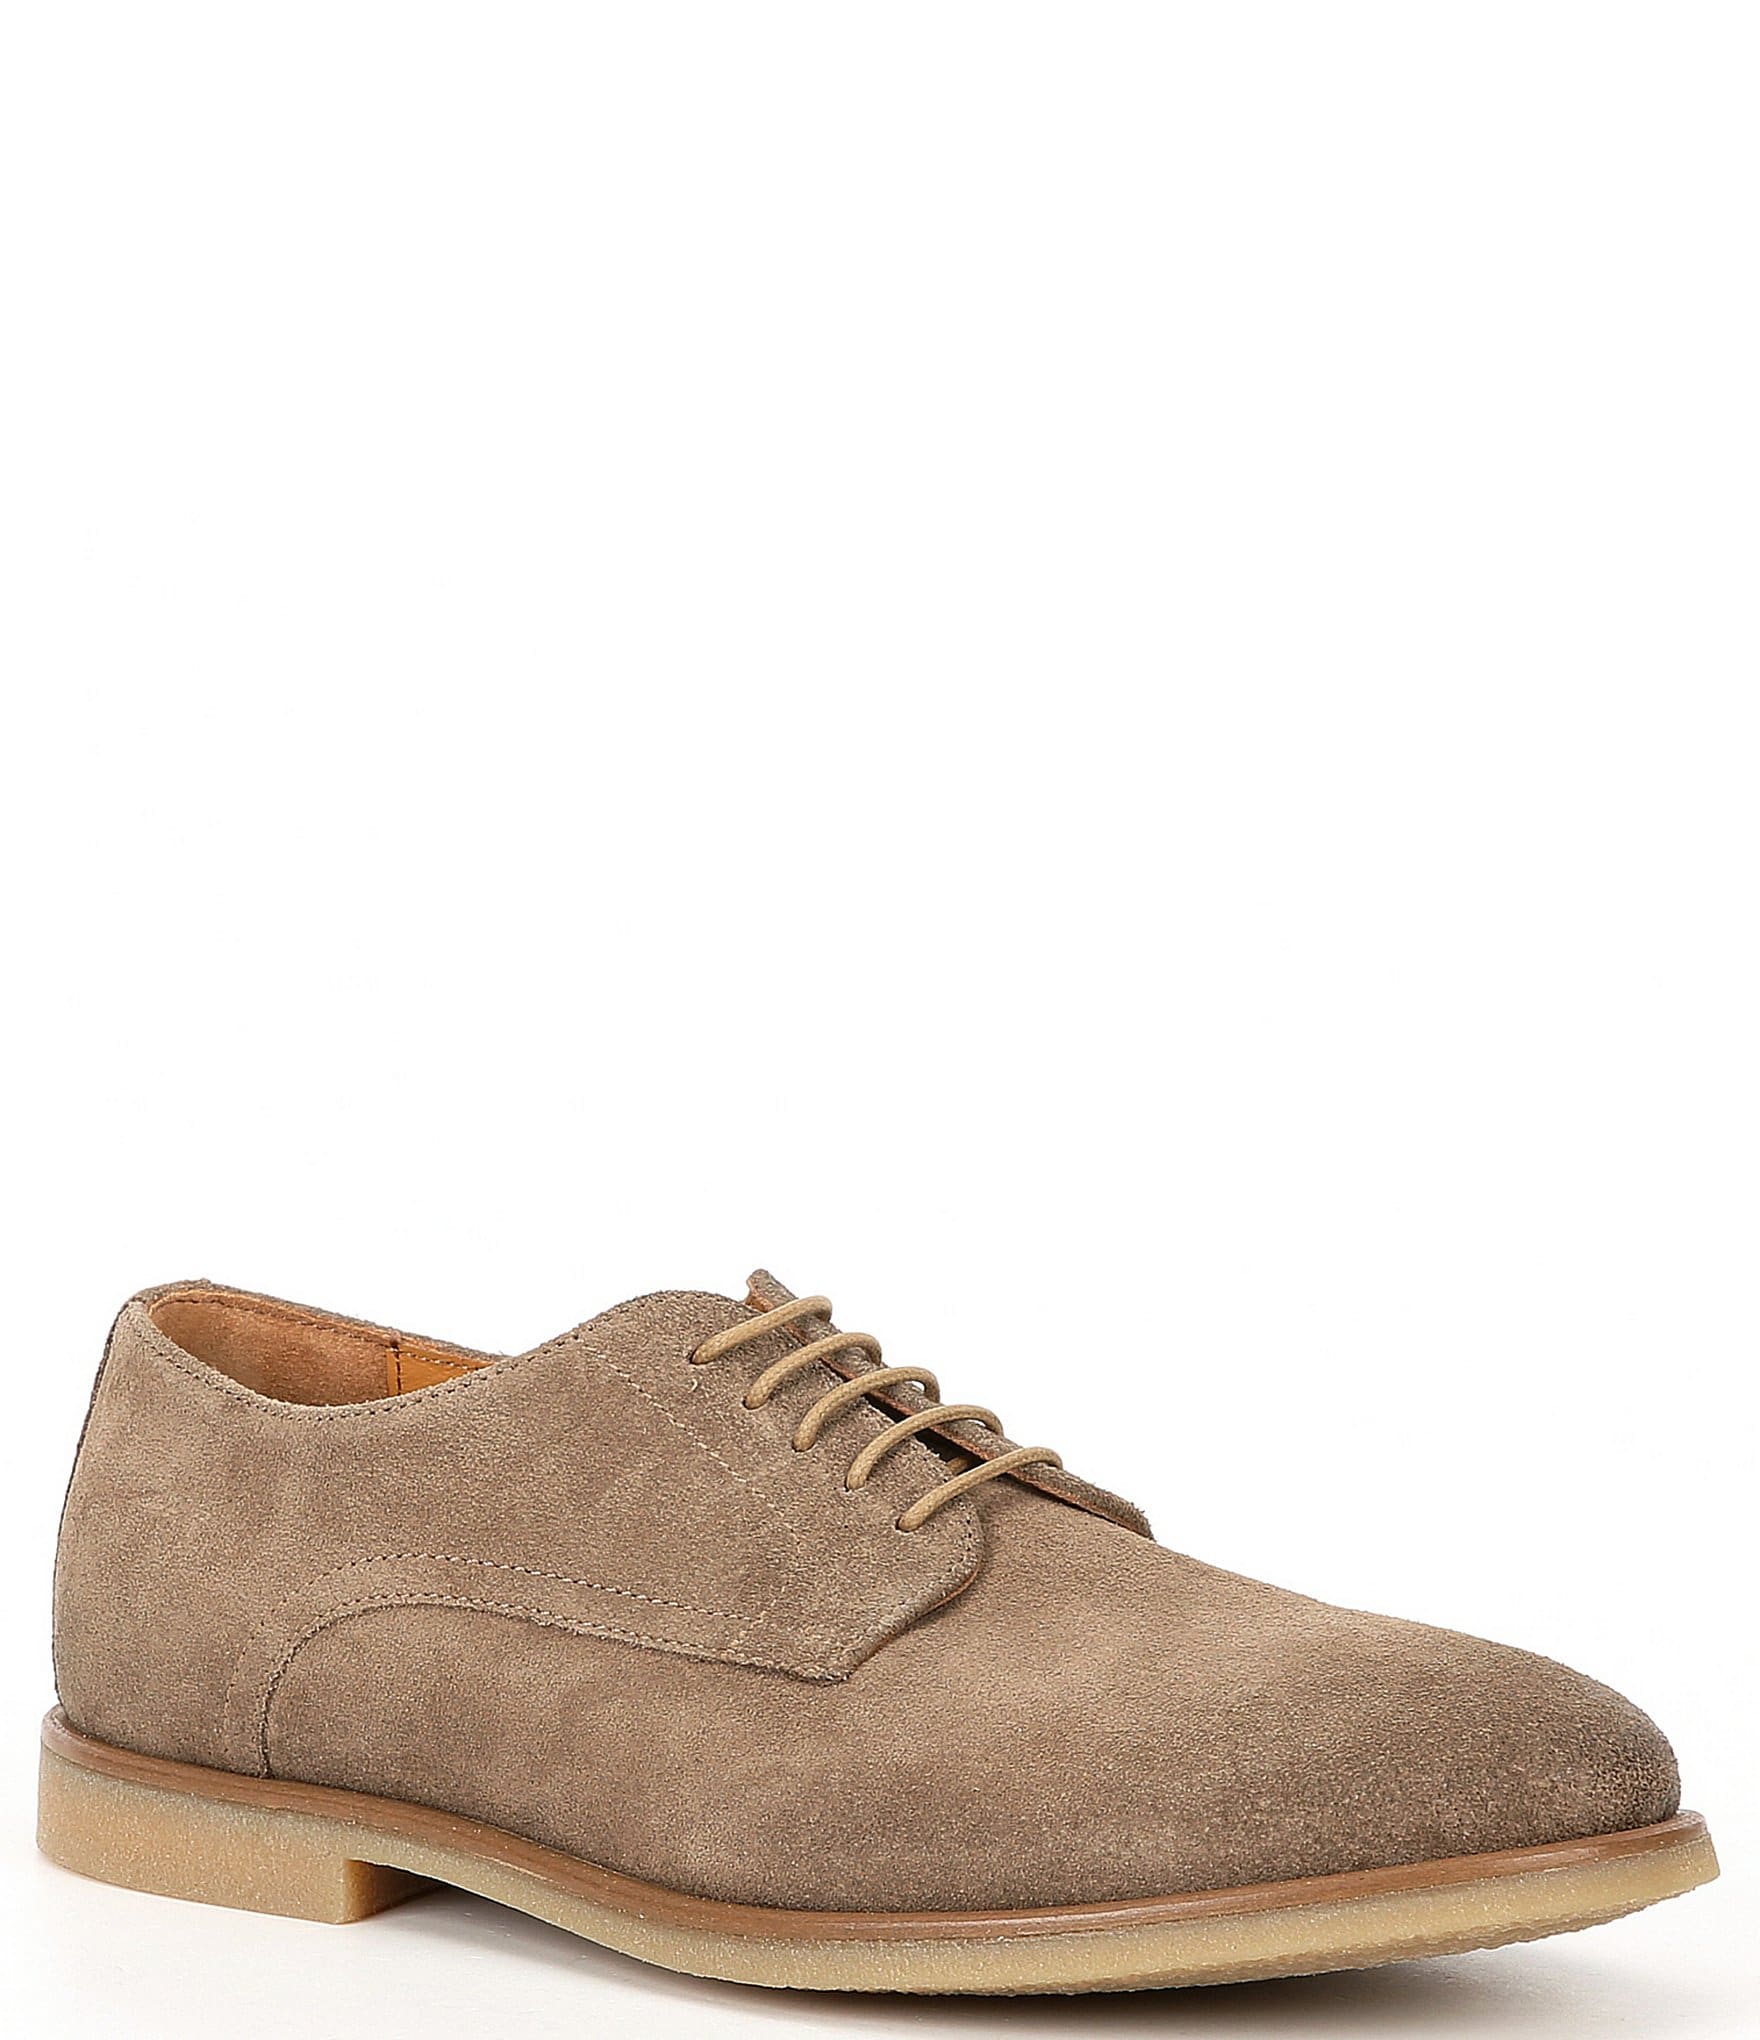 Dye Suede: Change The Color Of Your Shoes Like a Pro - The Elegant Oxford